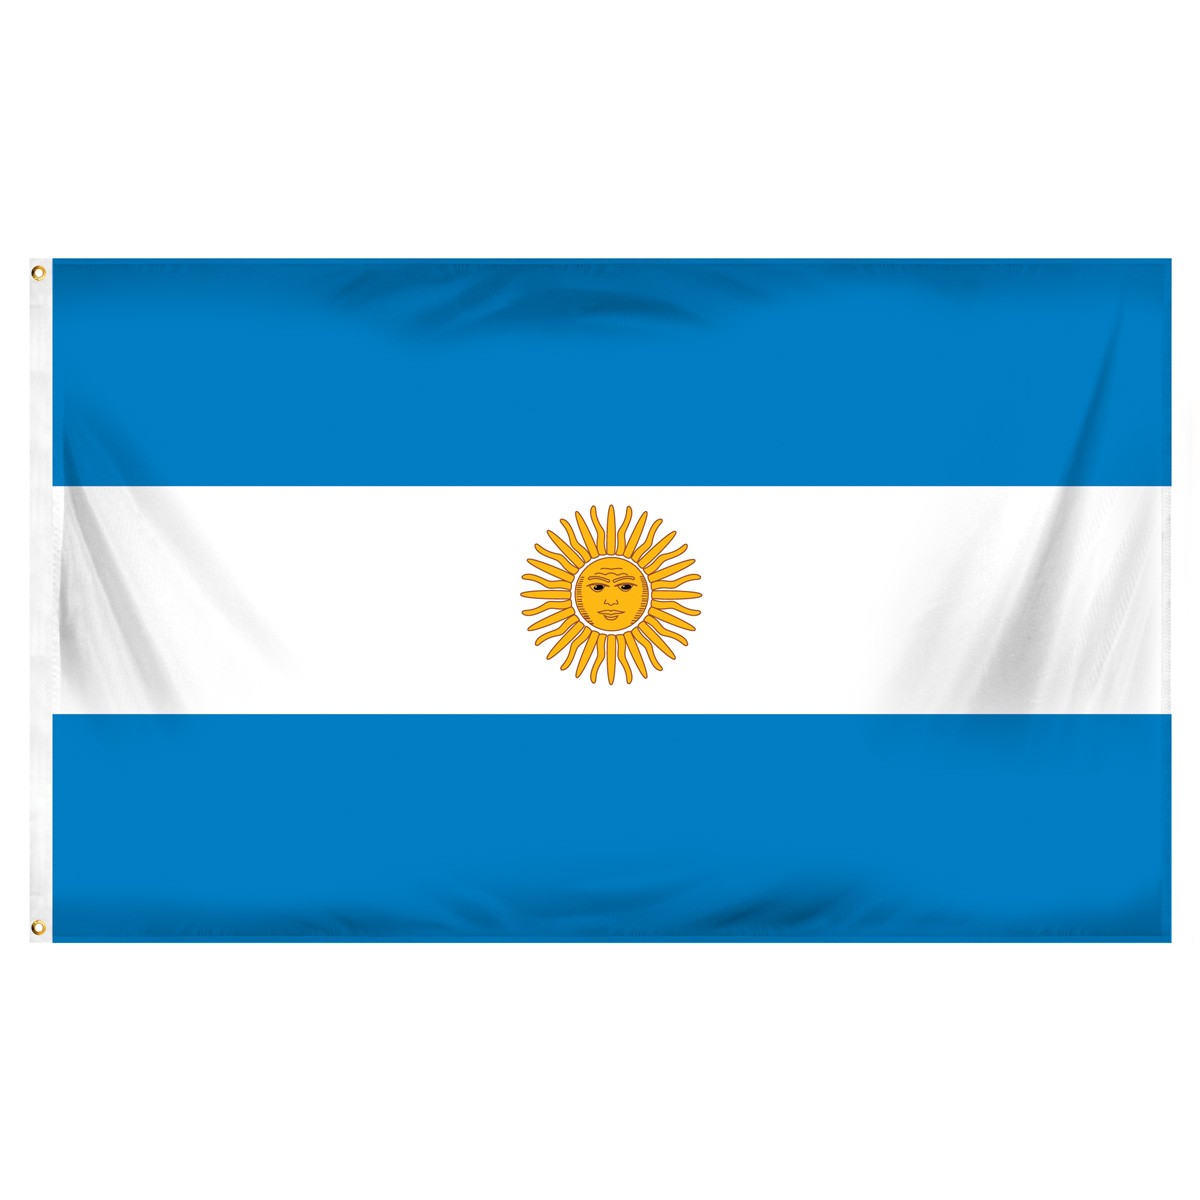 Argentina Submit Flags and Flags